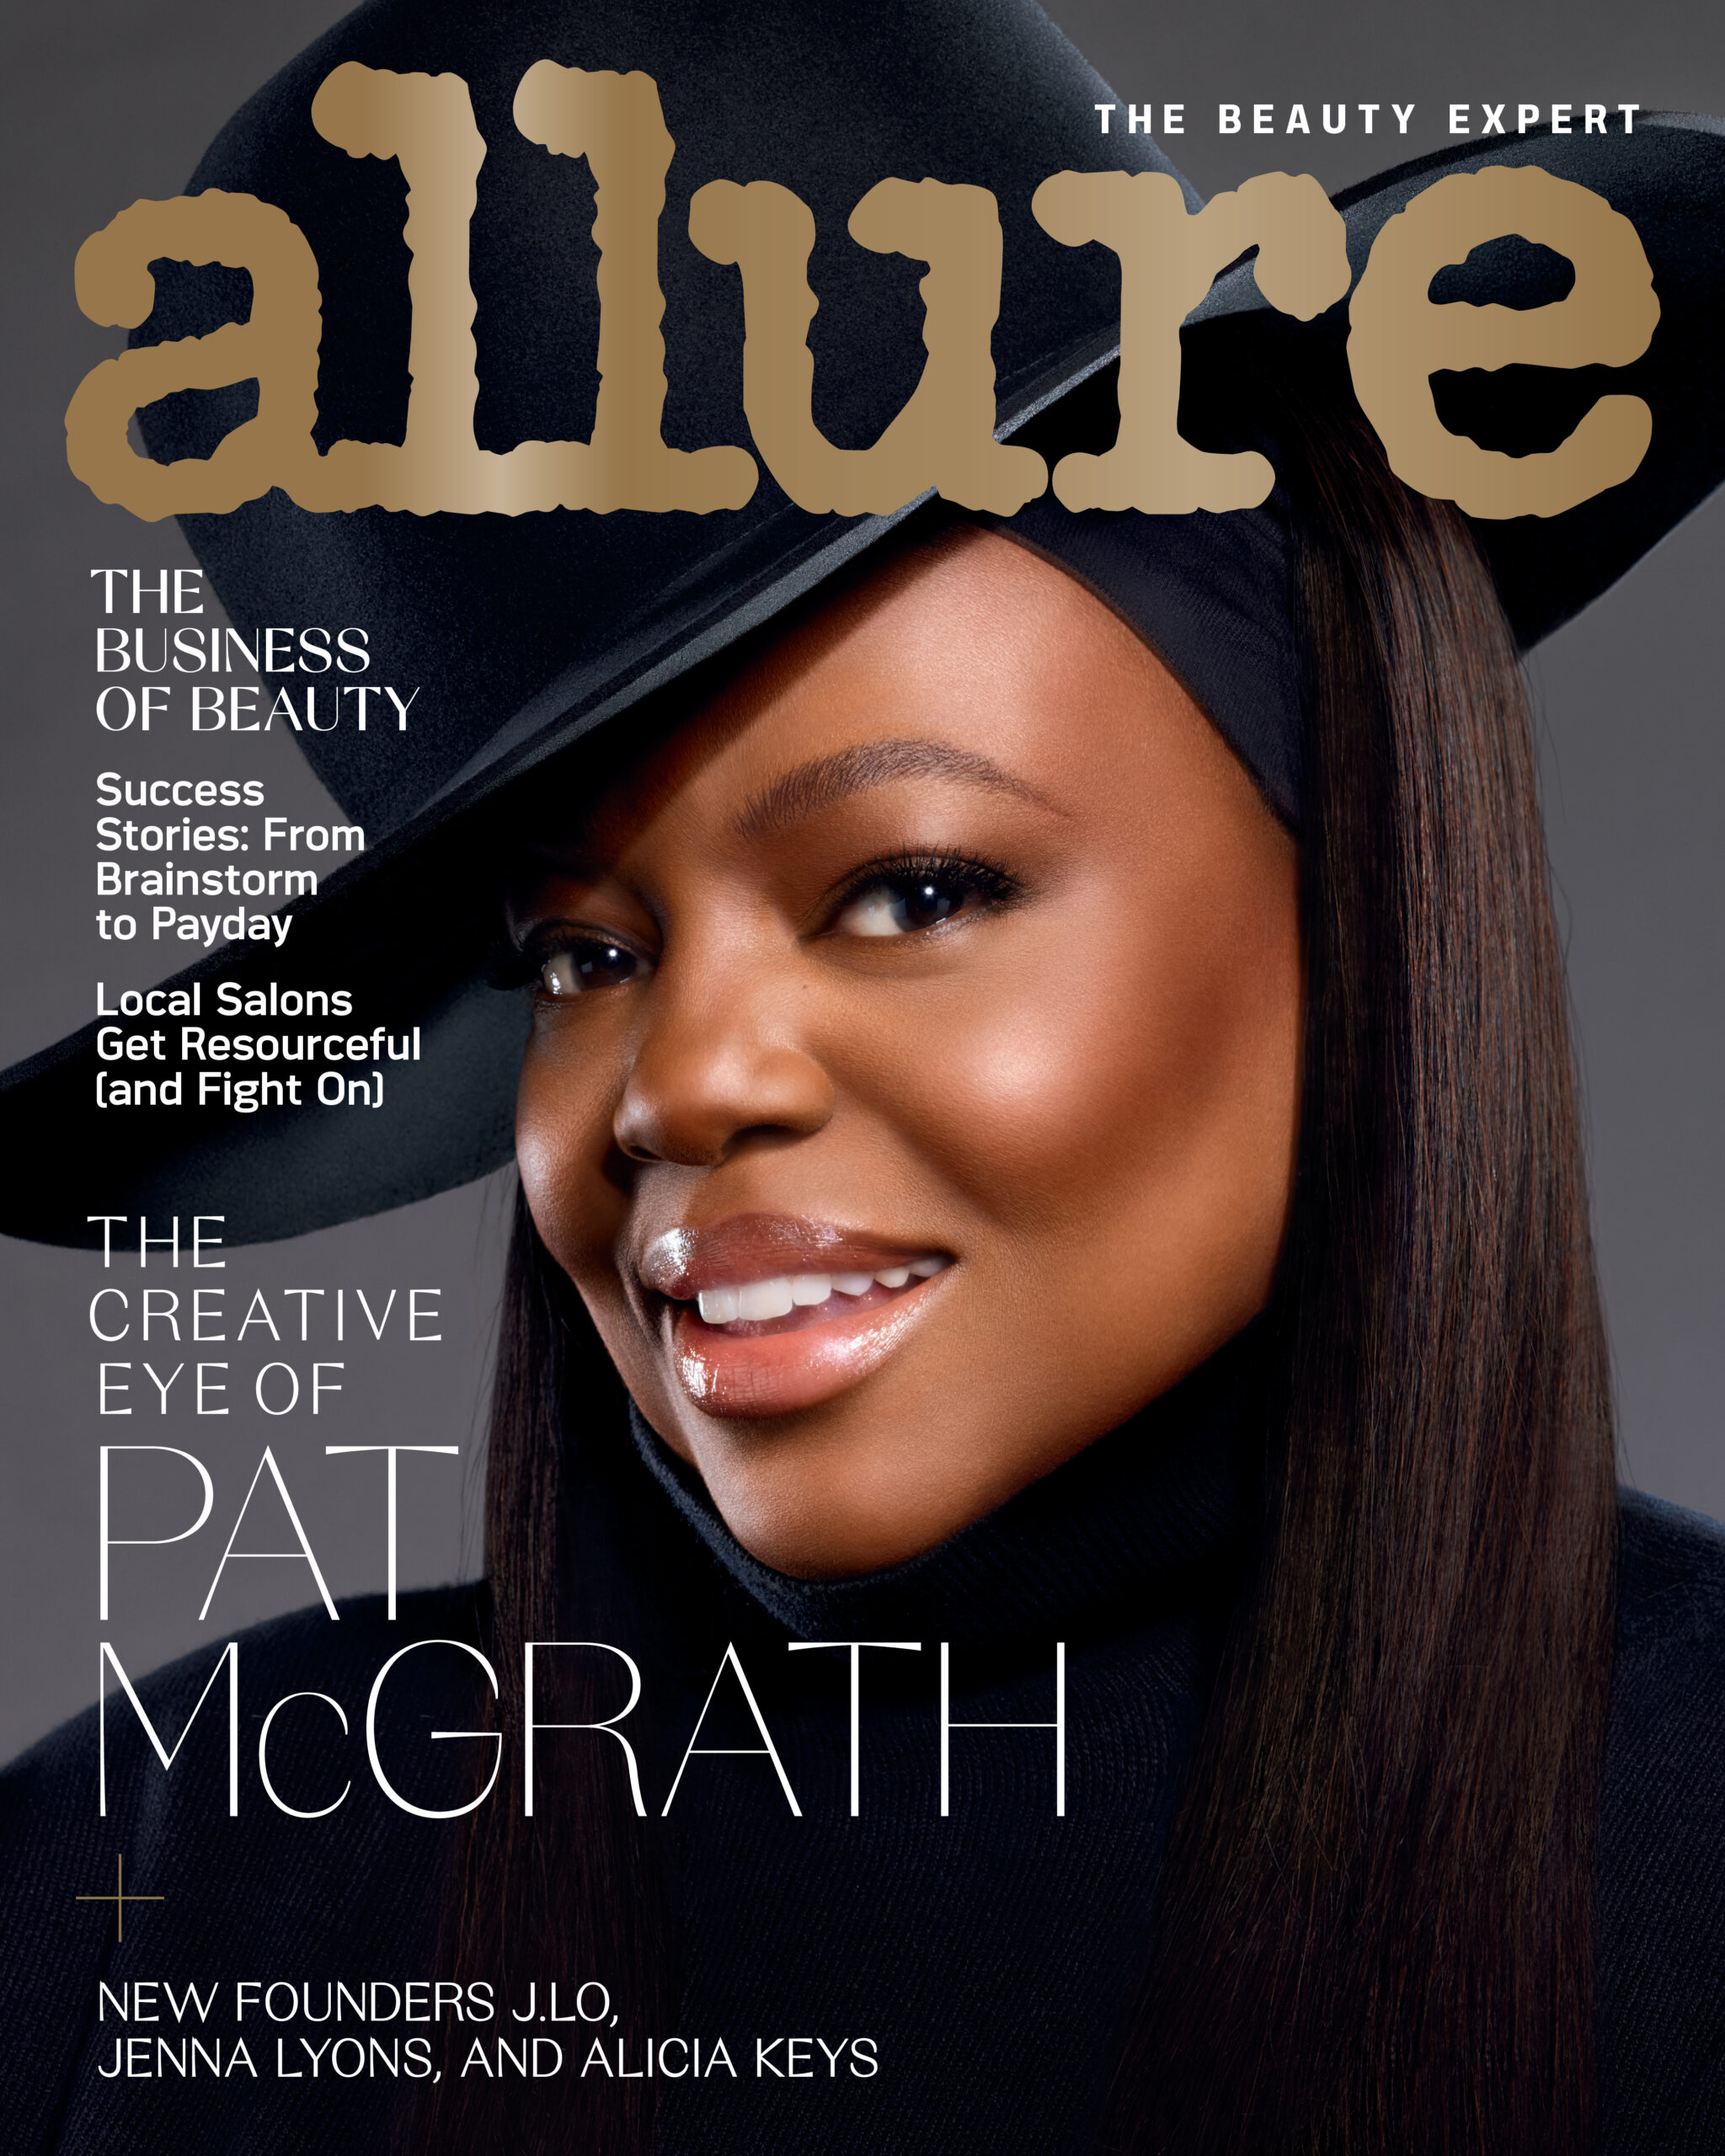 Beauty Entrepreneur Pat McGrath is Featured on Allure’s Business of Beauty issue.